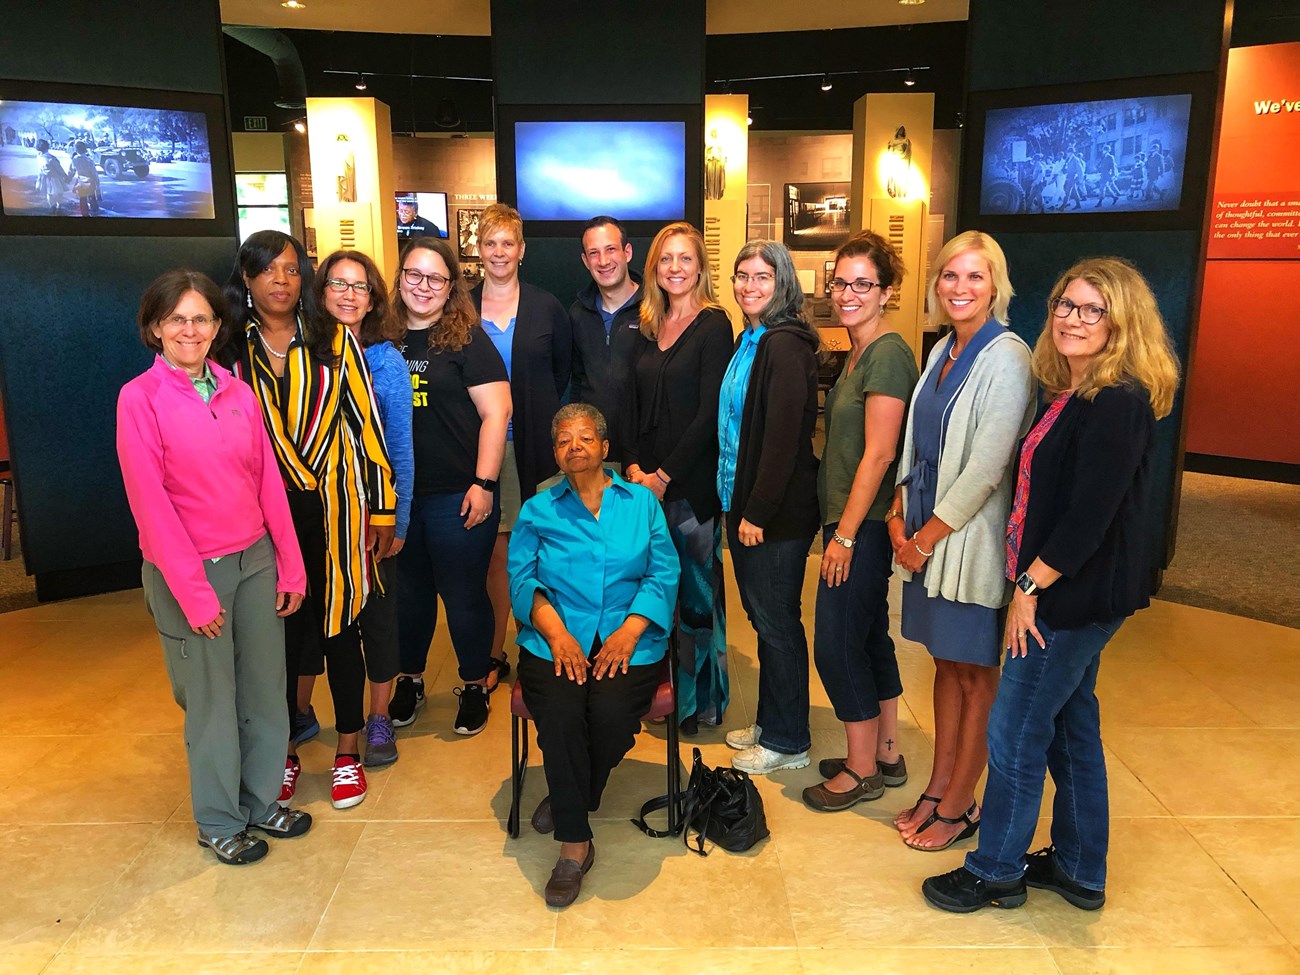 Previous Civil Rights Educator Institute participants at Little Rock Central High School NHS Visitor Center with Elizabeth Eckford, one of the Little Rock Nine.